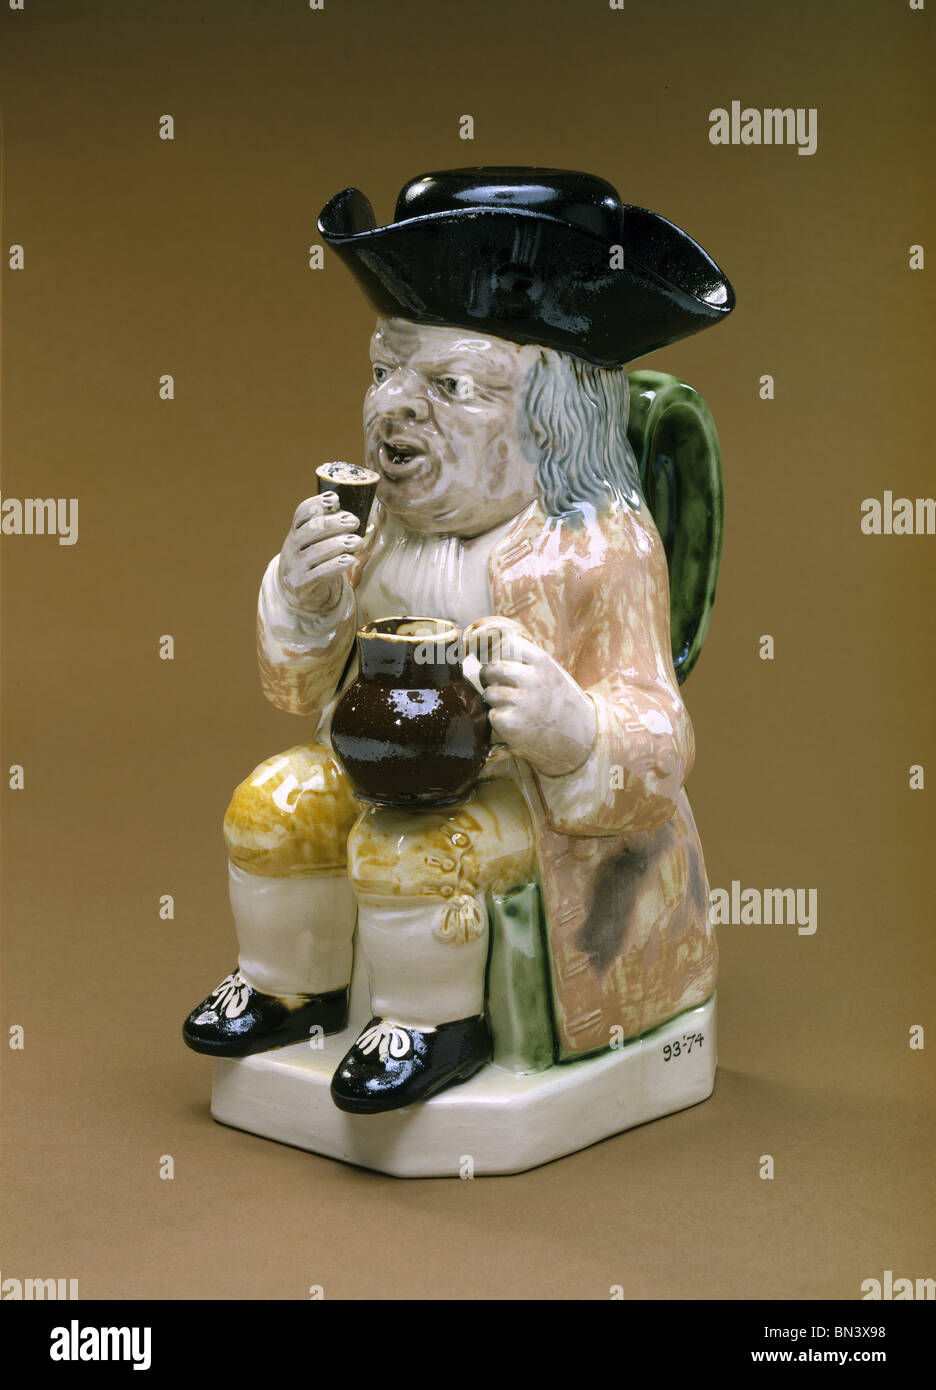 Toby jug. Angleterre, fin du xviiie siècle Banque D'Images